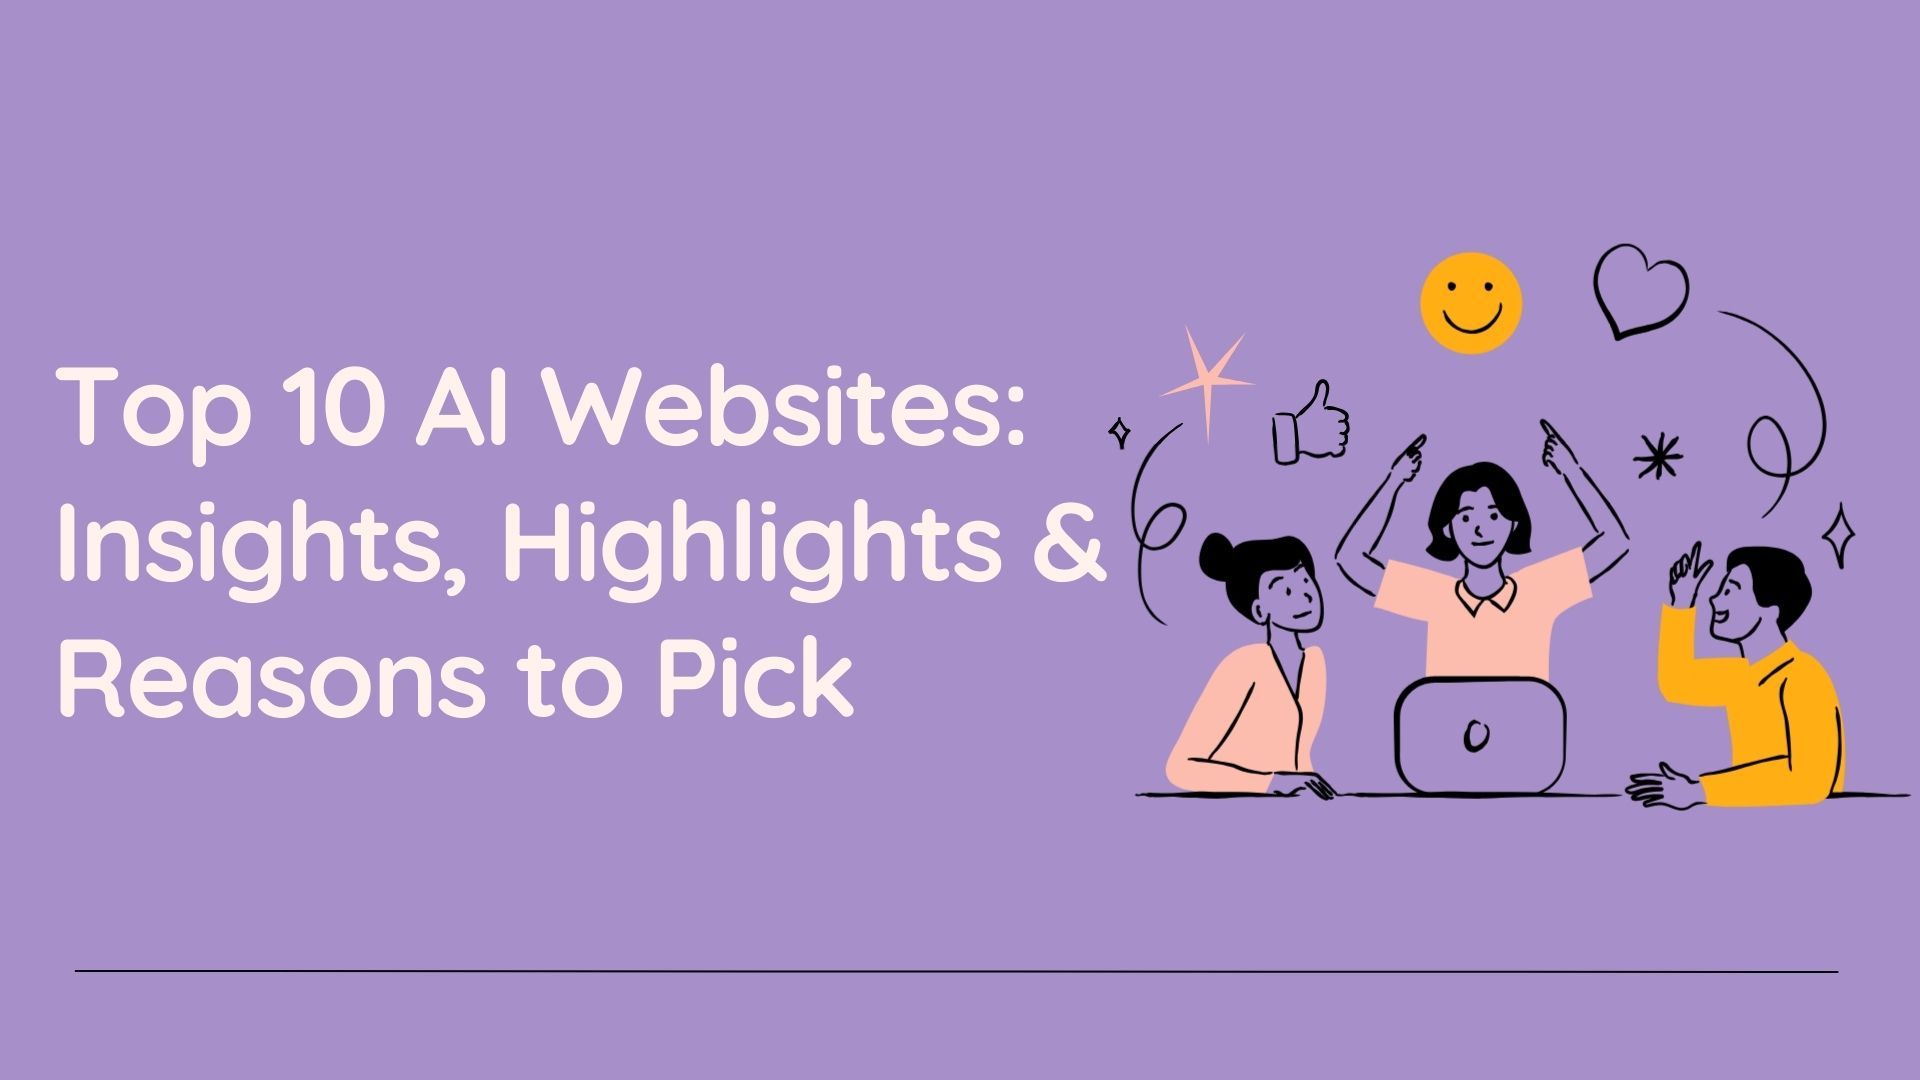 Top 10 AI Websites: Insights, Highlights & Reasons to Pick